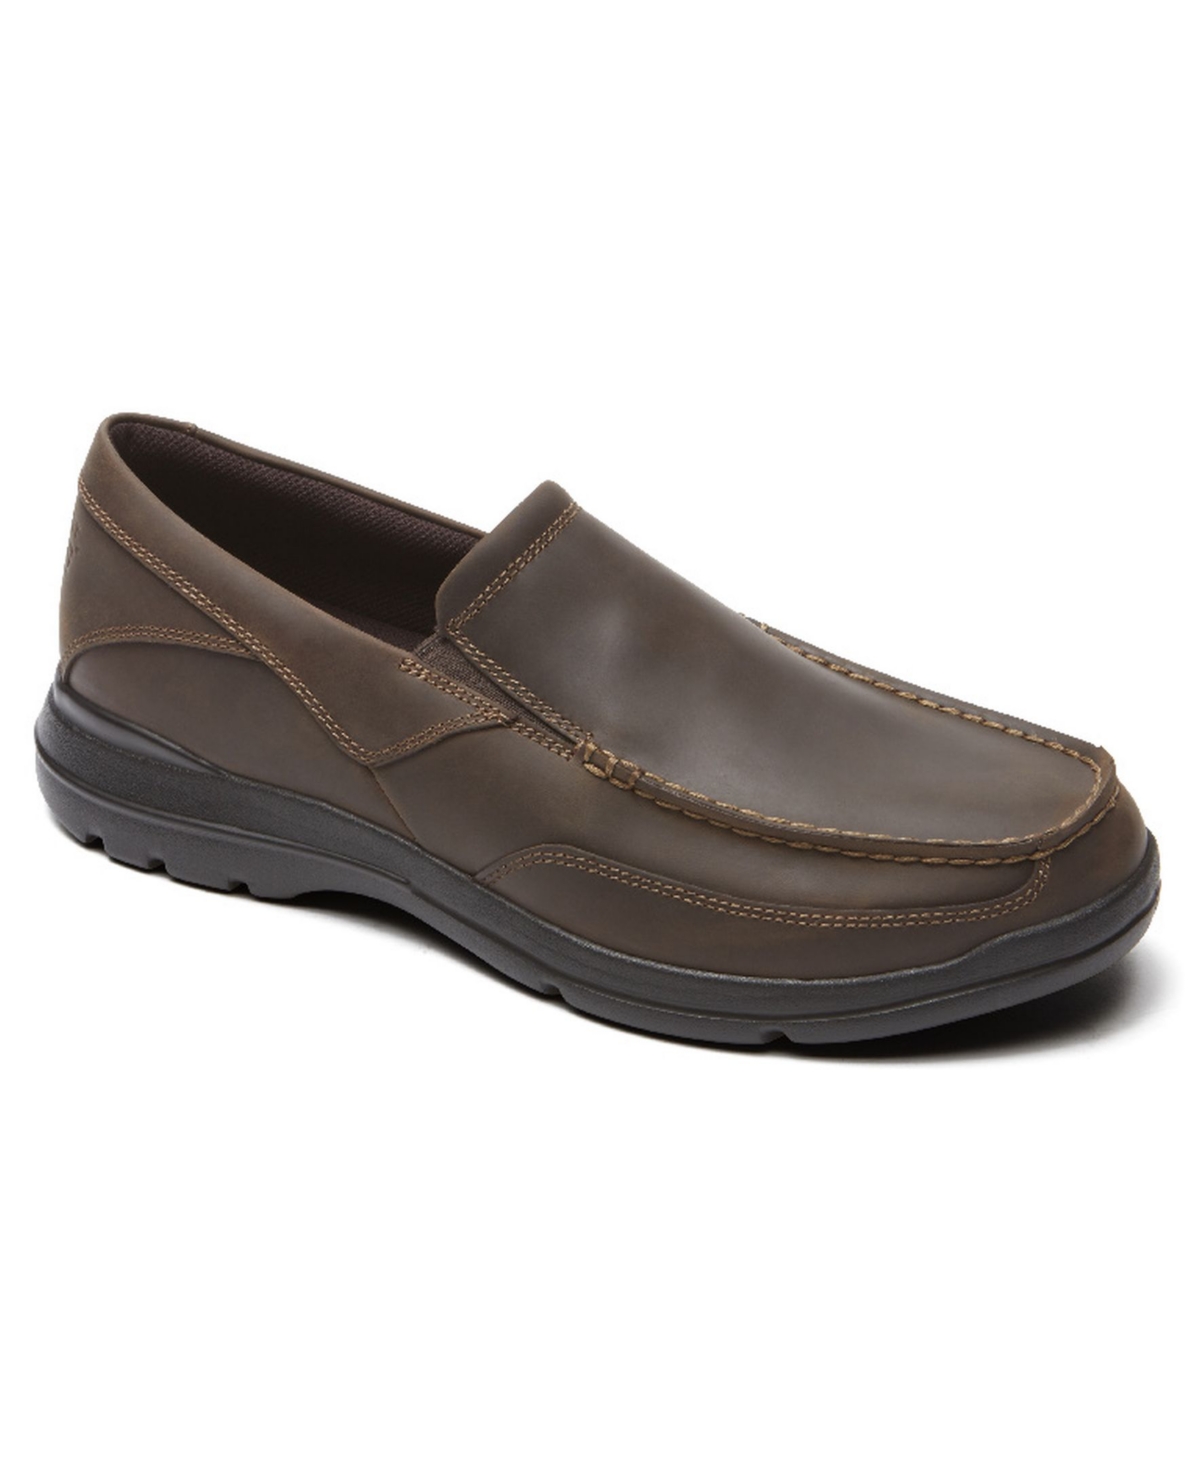 Rockport Men's Junction Point Slip On Shoes Men's Shoes In Chocolate